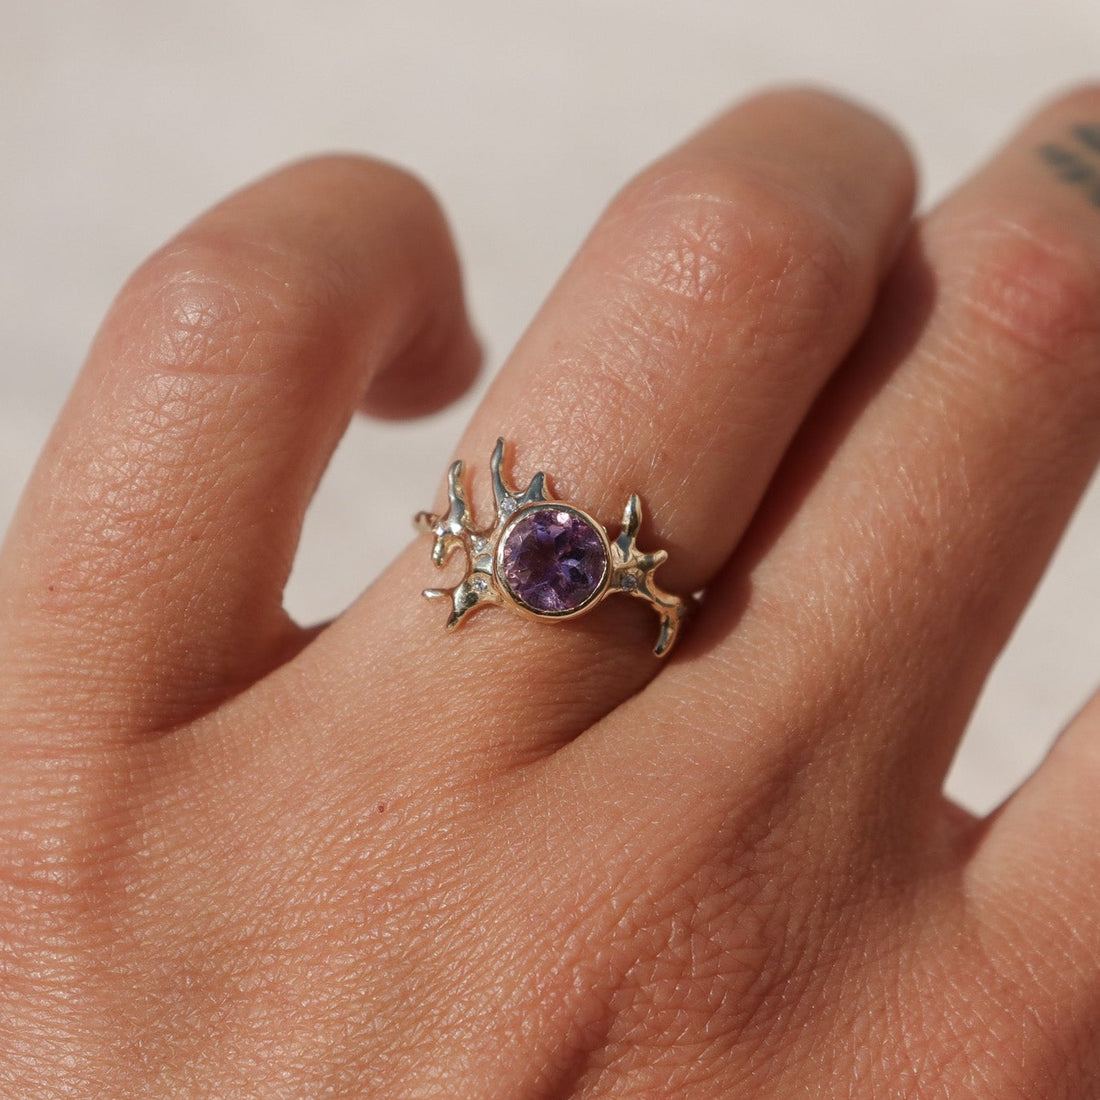 Exquisite round brilliant cut ametrine gemstone, bezel-set in a gold band with an organic coral-like design, adorned with sparkling diamond accents, worn on a finger to show scale.